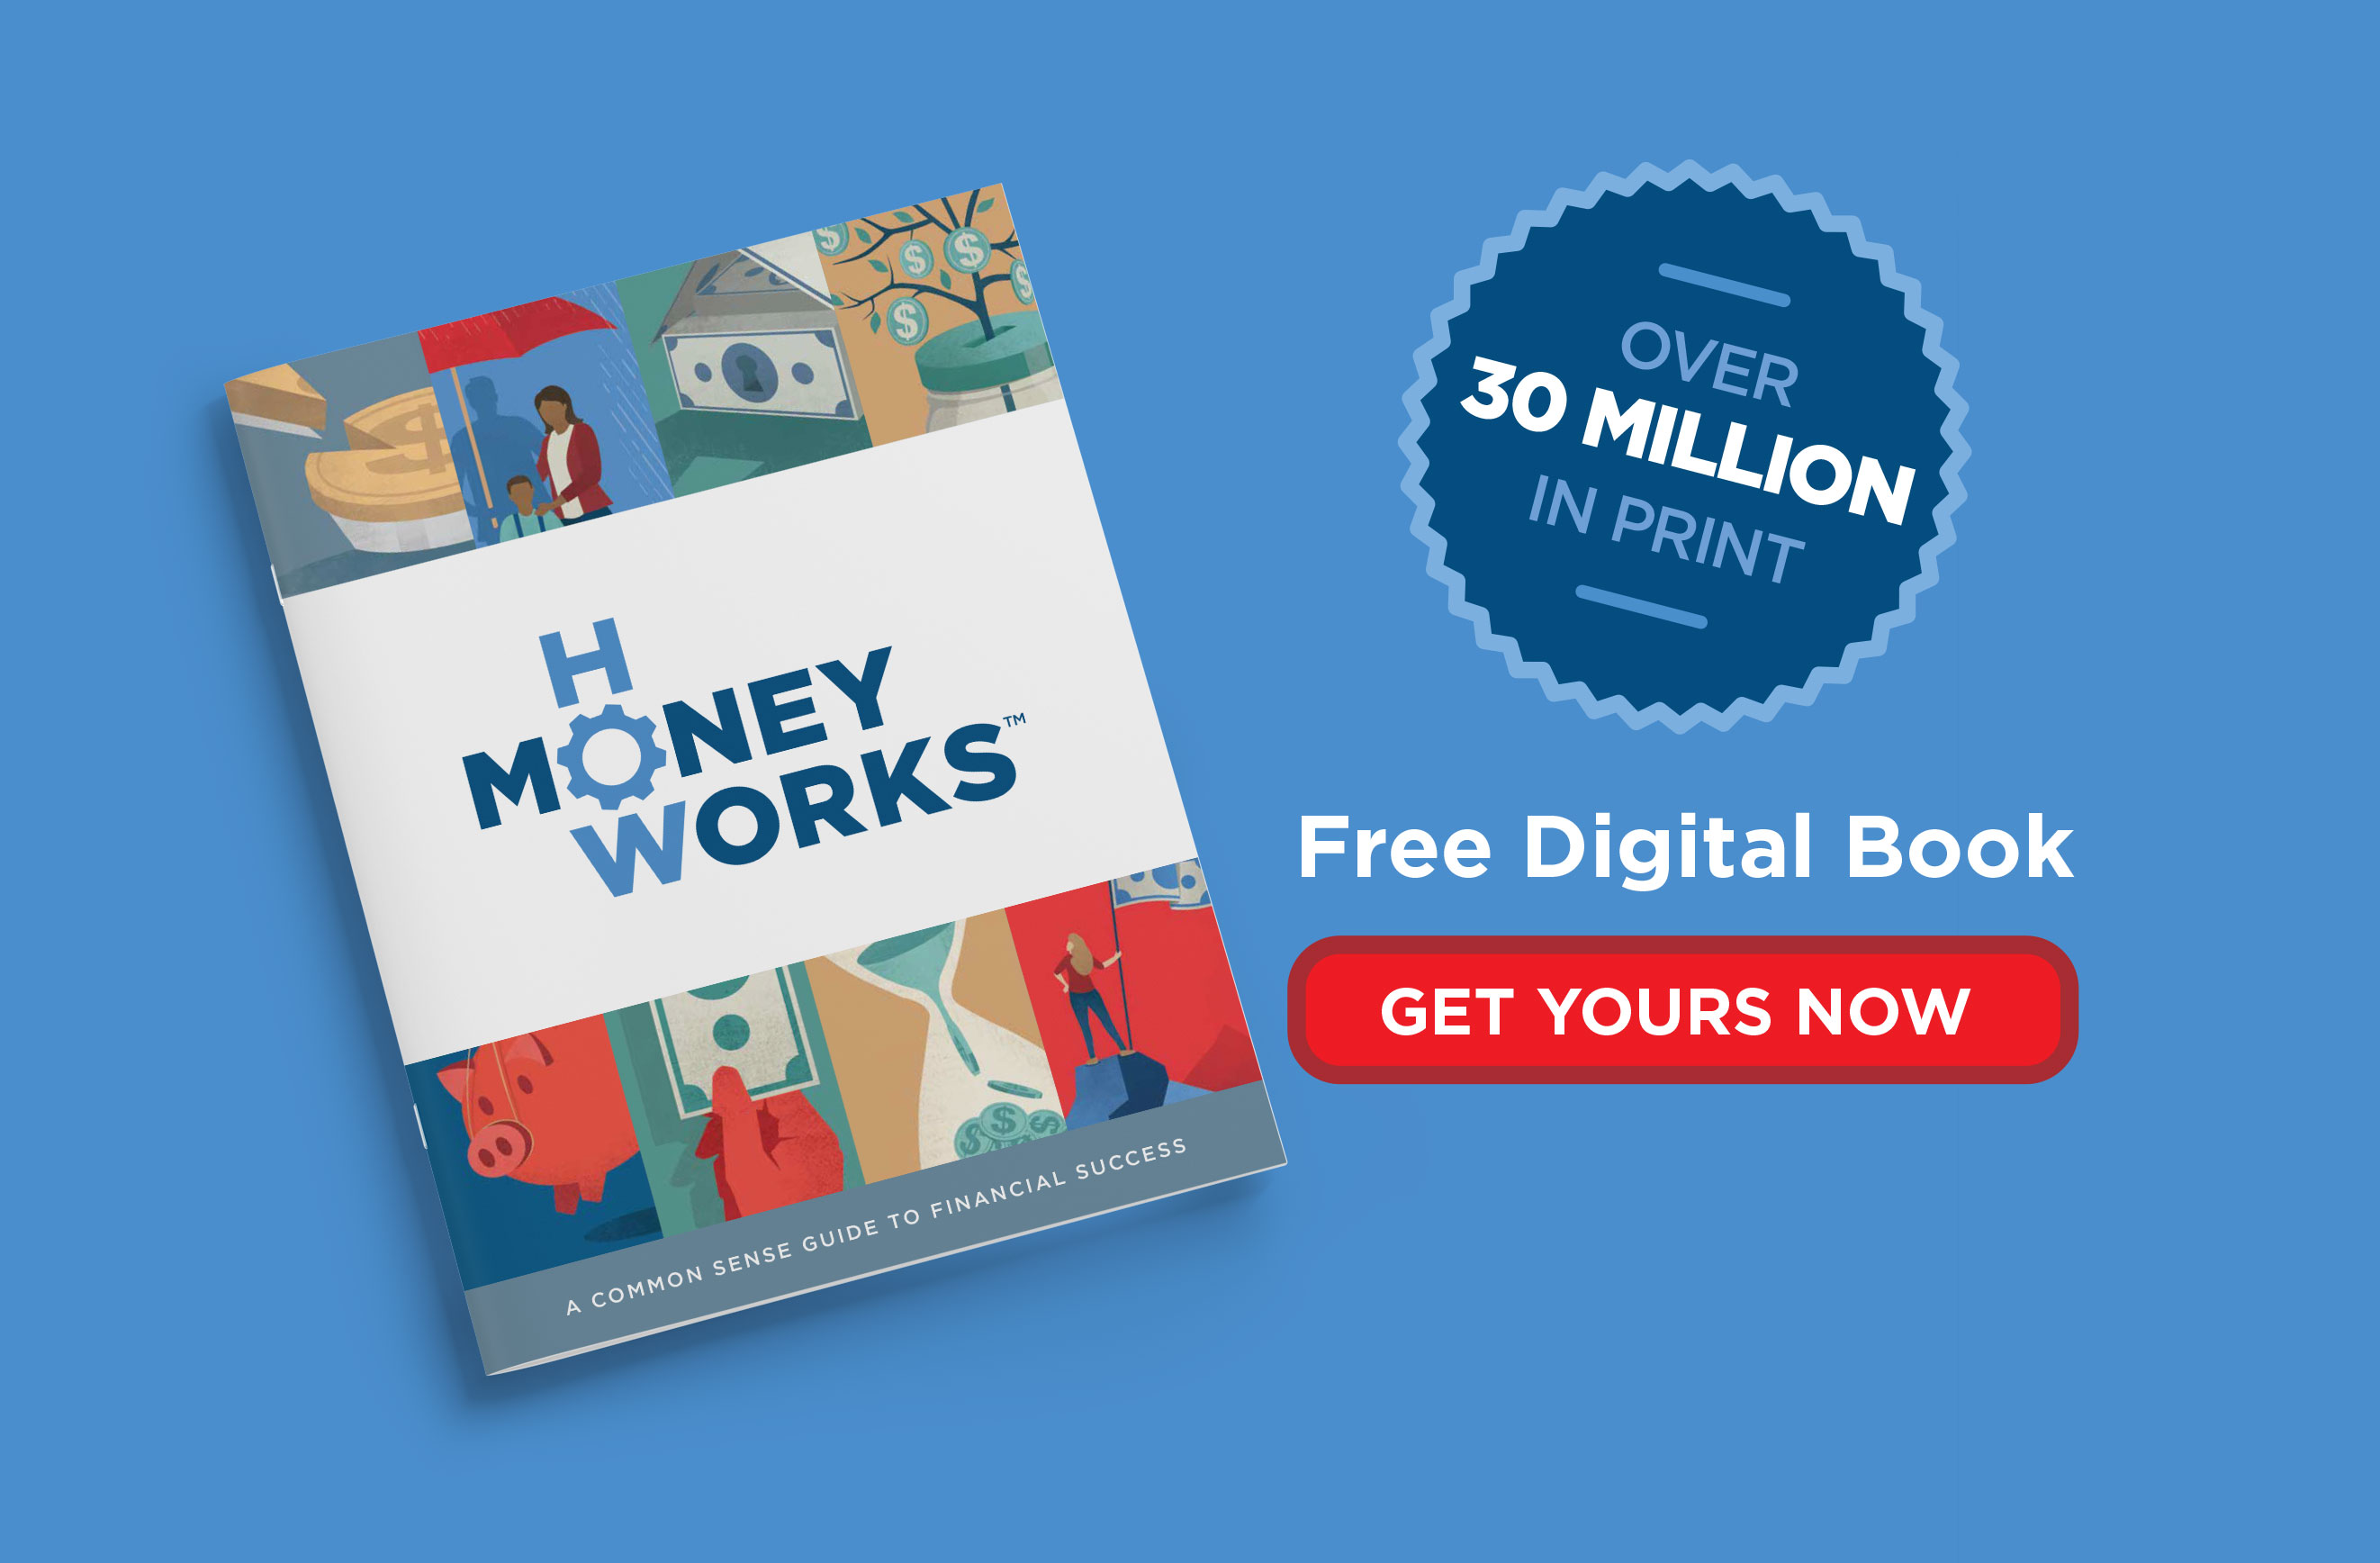 How Money Works™ - Over 30 million in print. Free digital book. Get yours now.